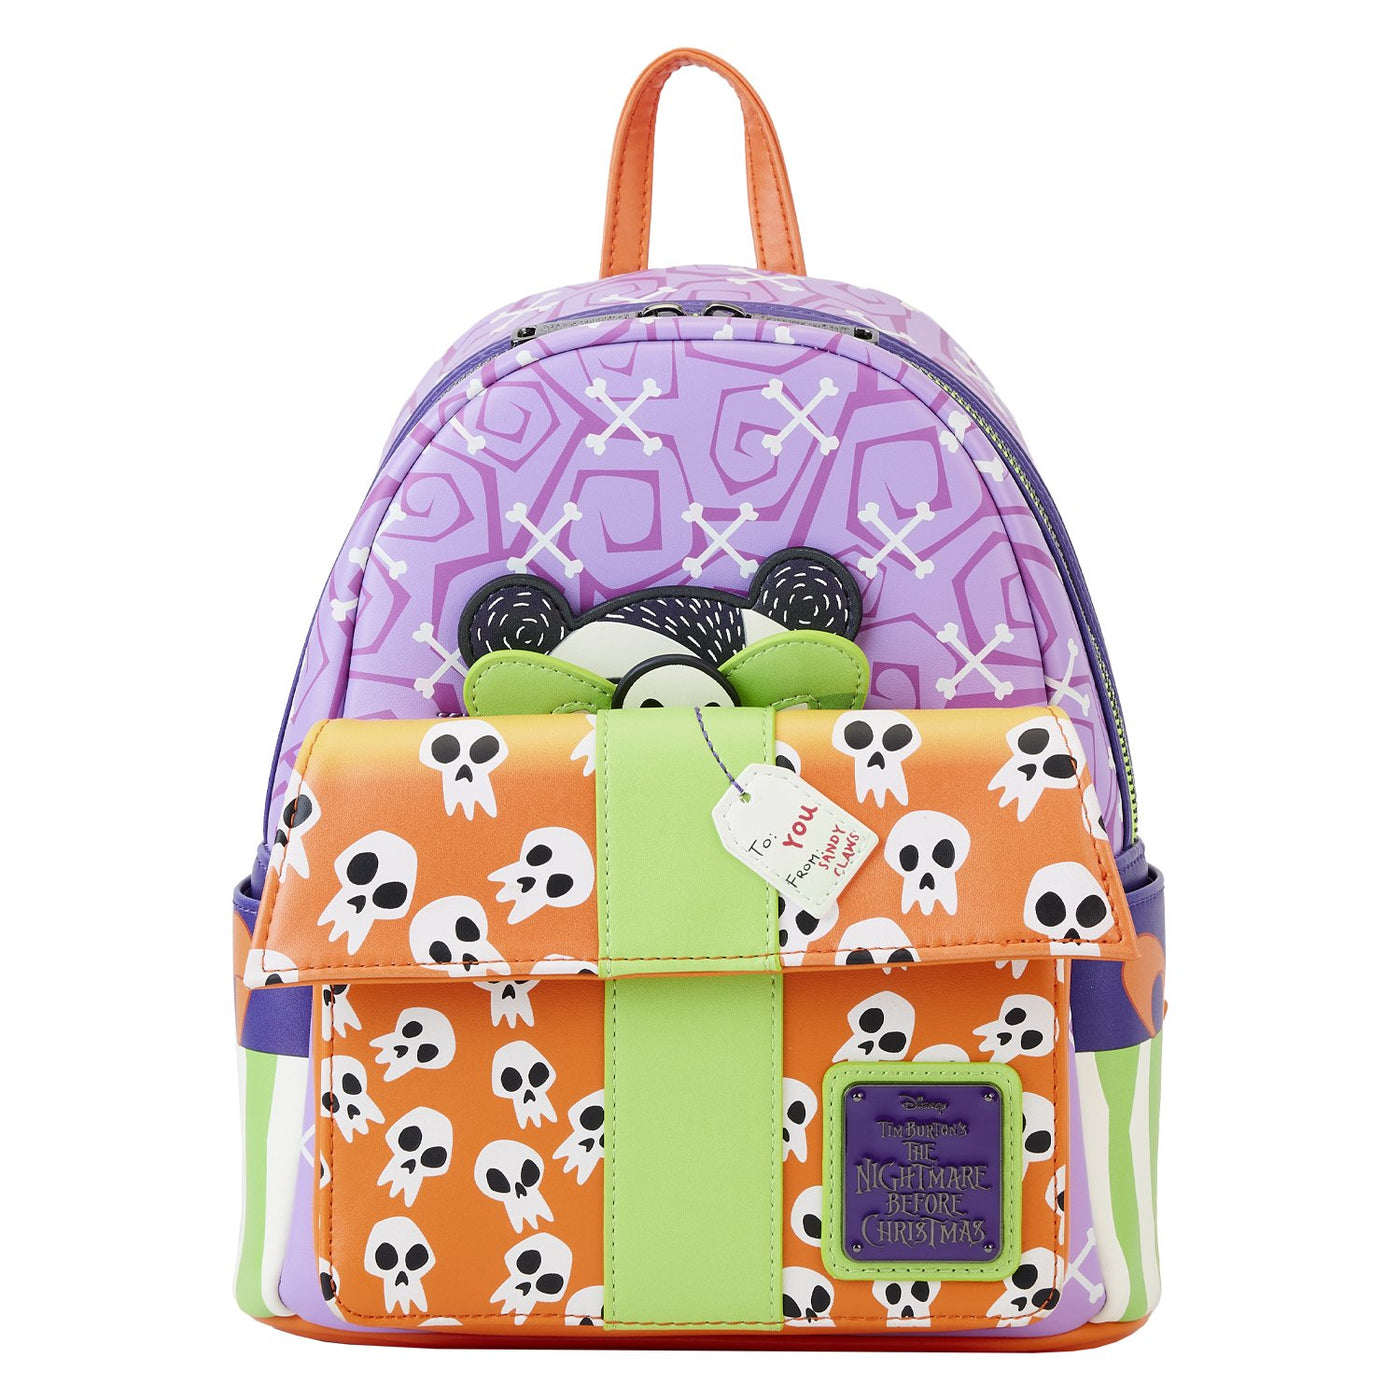 Loungefly Disney Nightmare Before Christmas Scary Teddy Present Mini Backpack - Scary Teddy Feature